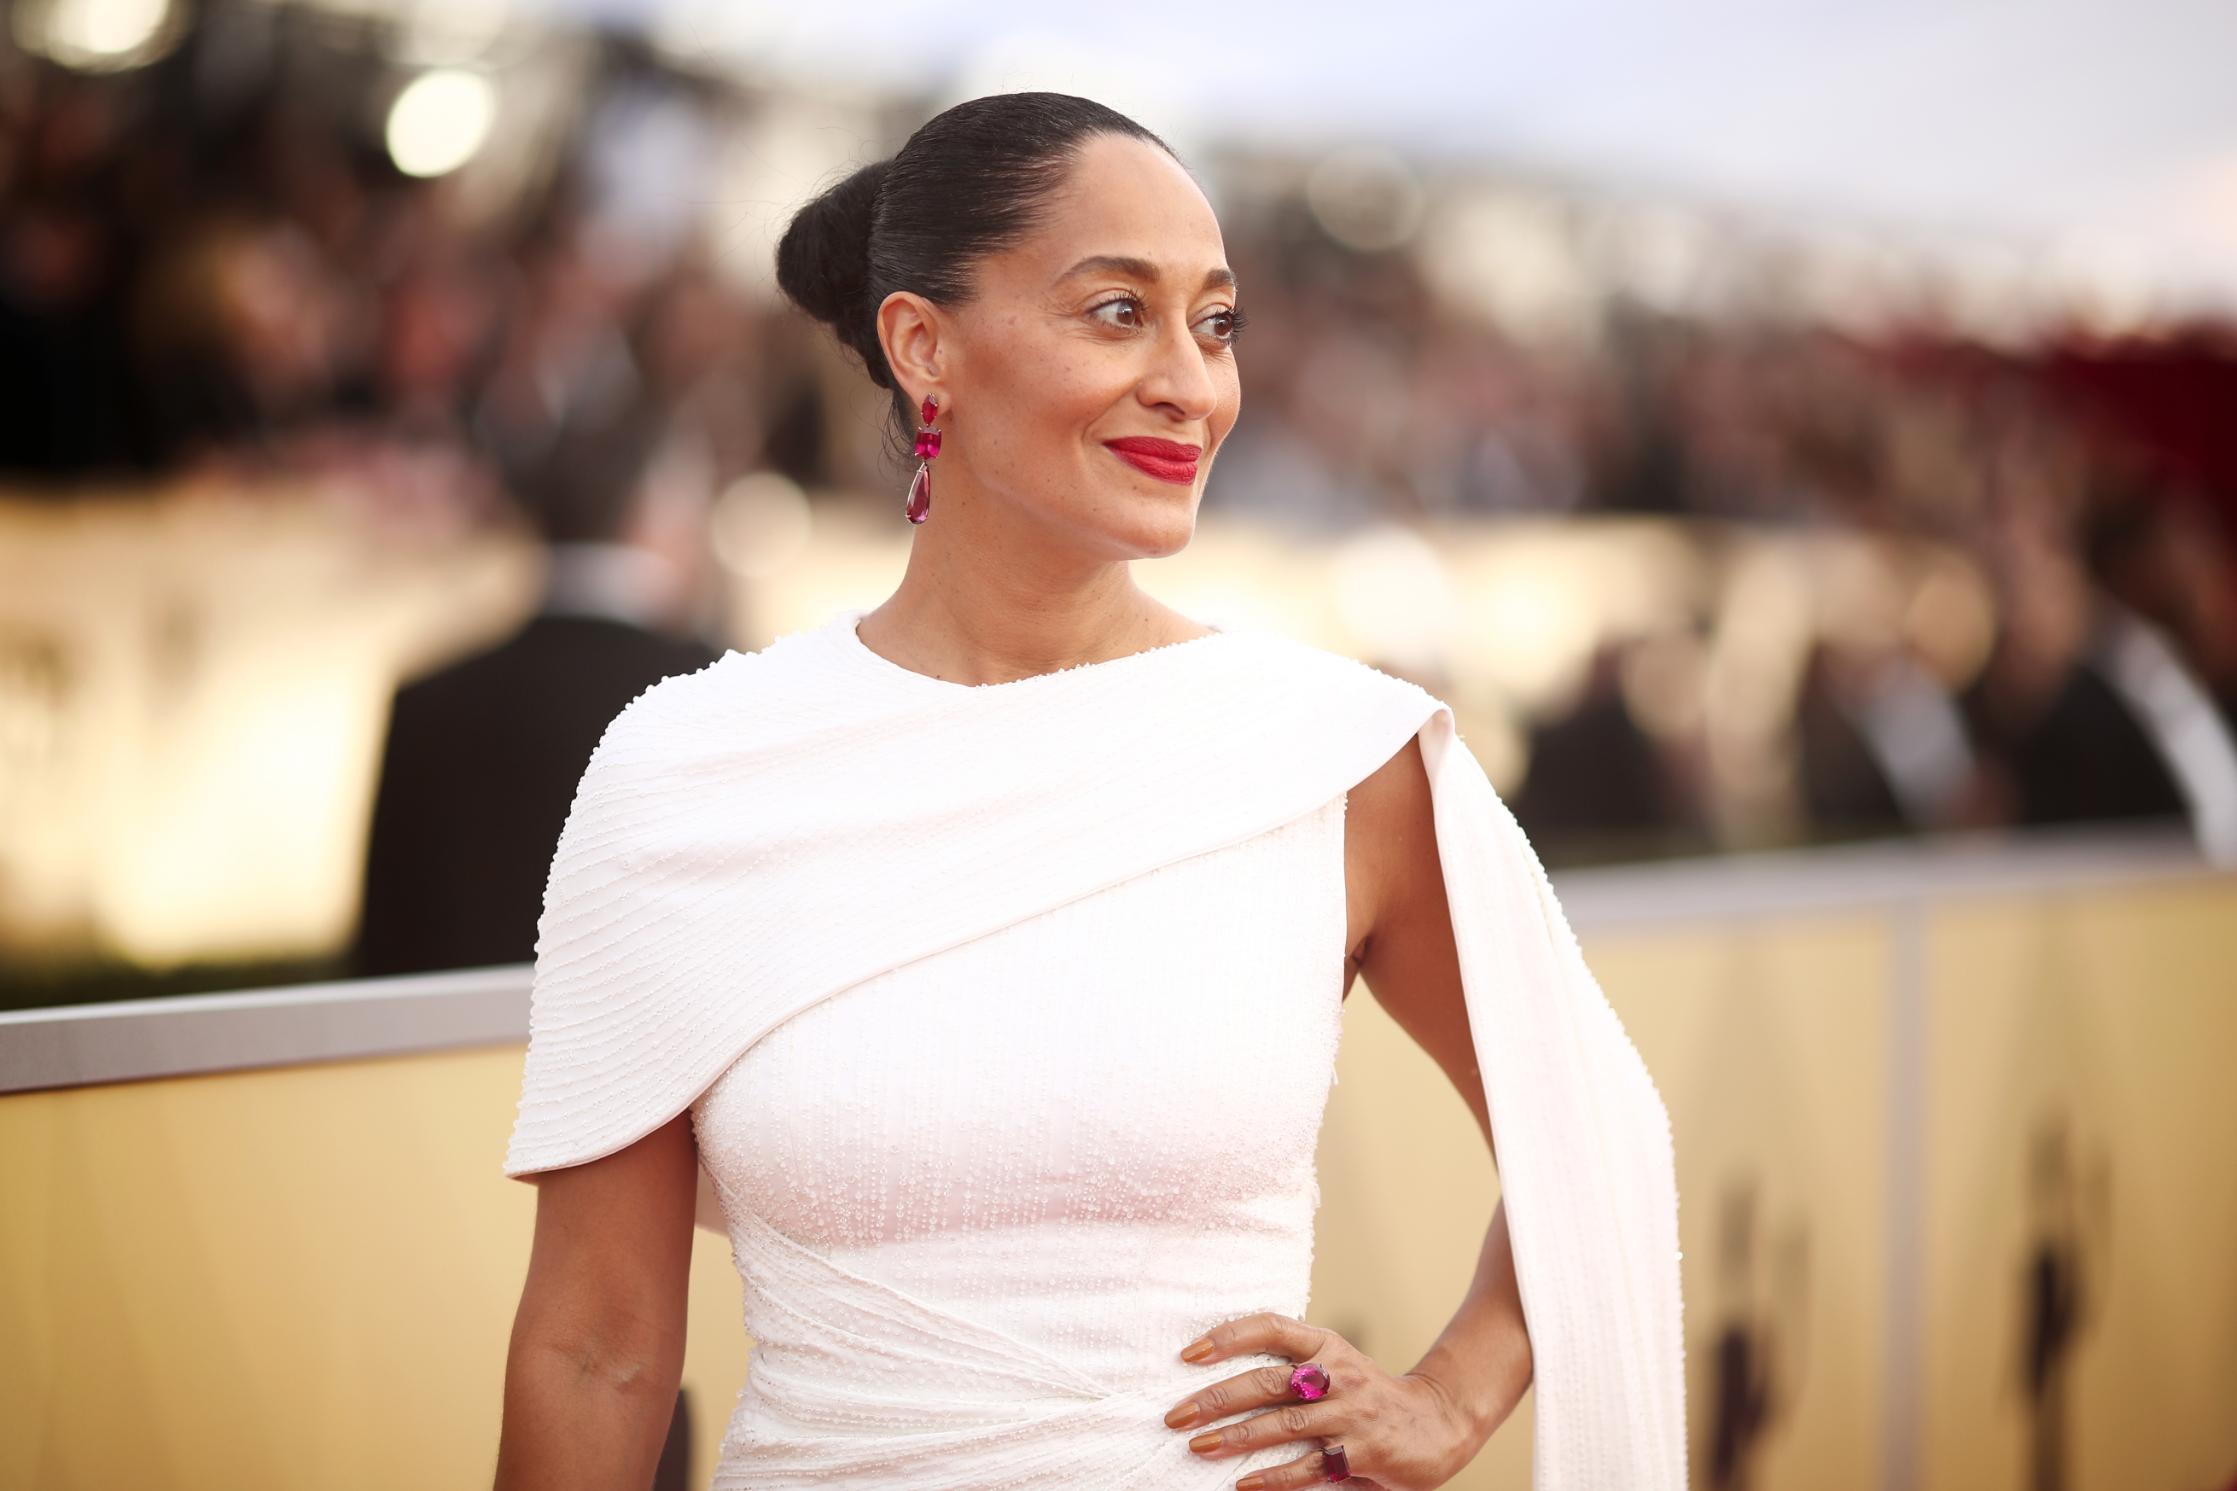 Tracee Ellis Ross power fashion, beauty and self-love - CNN Style